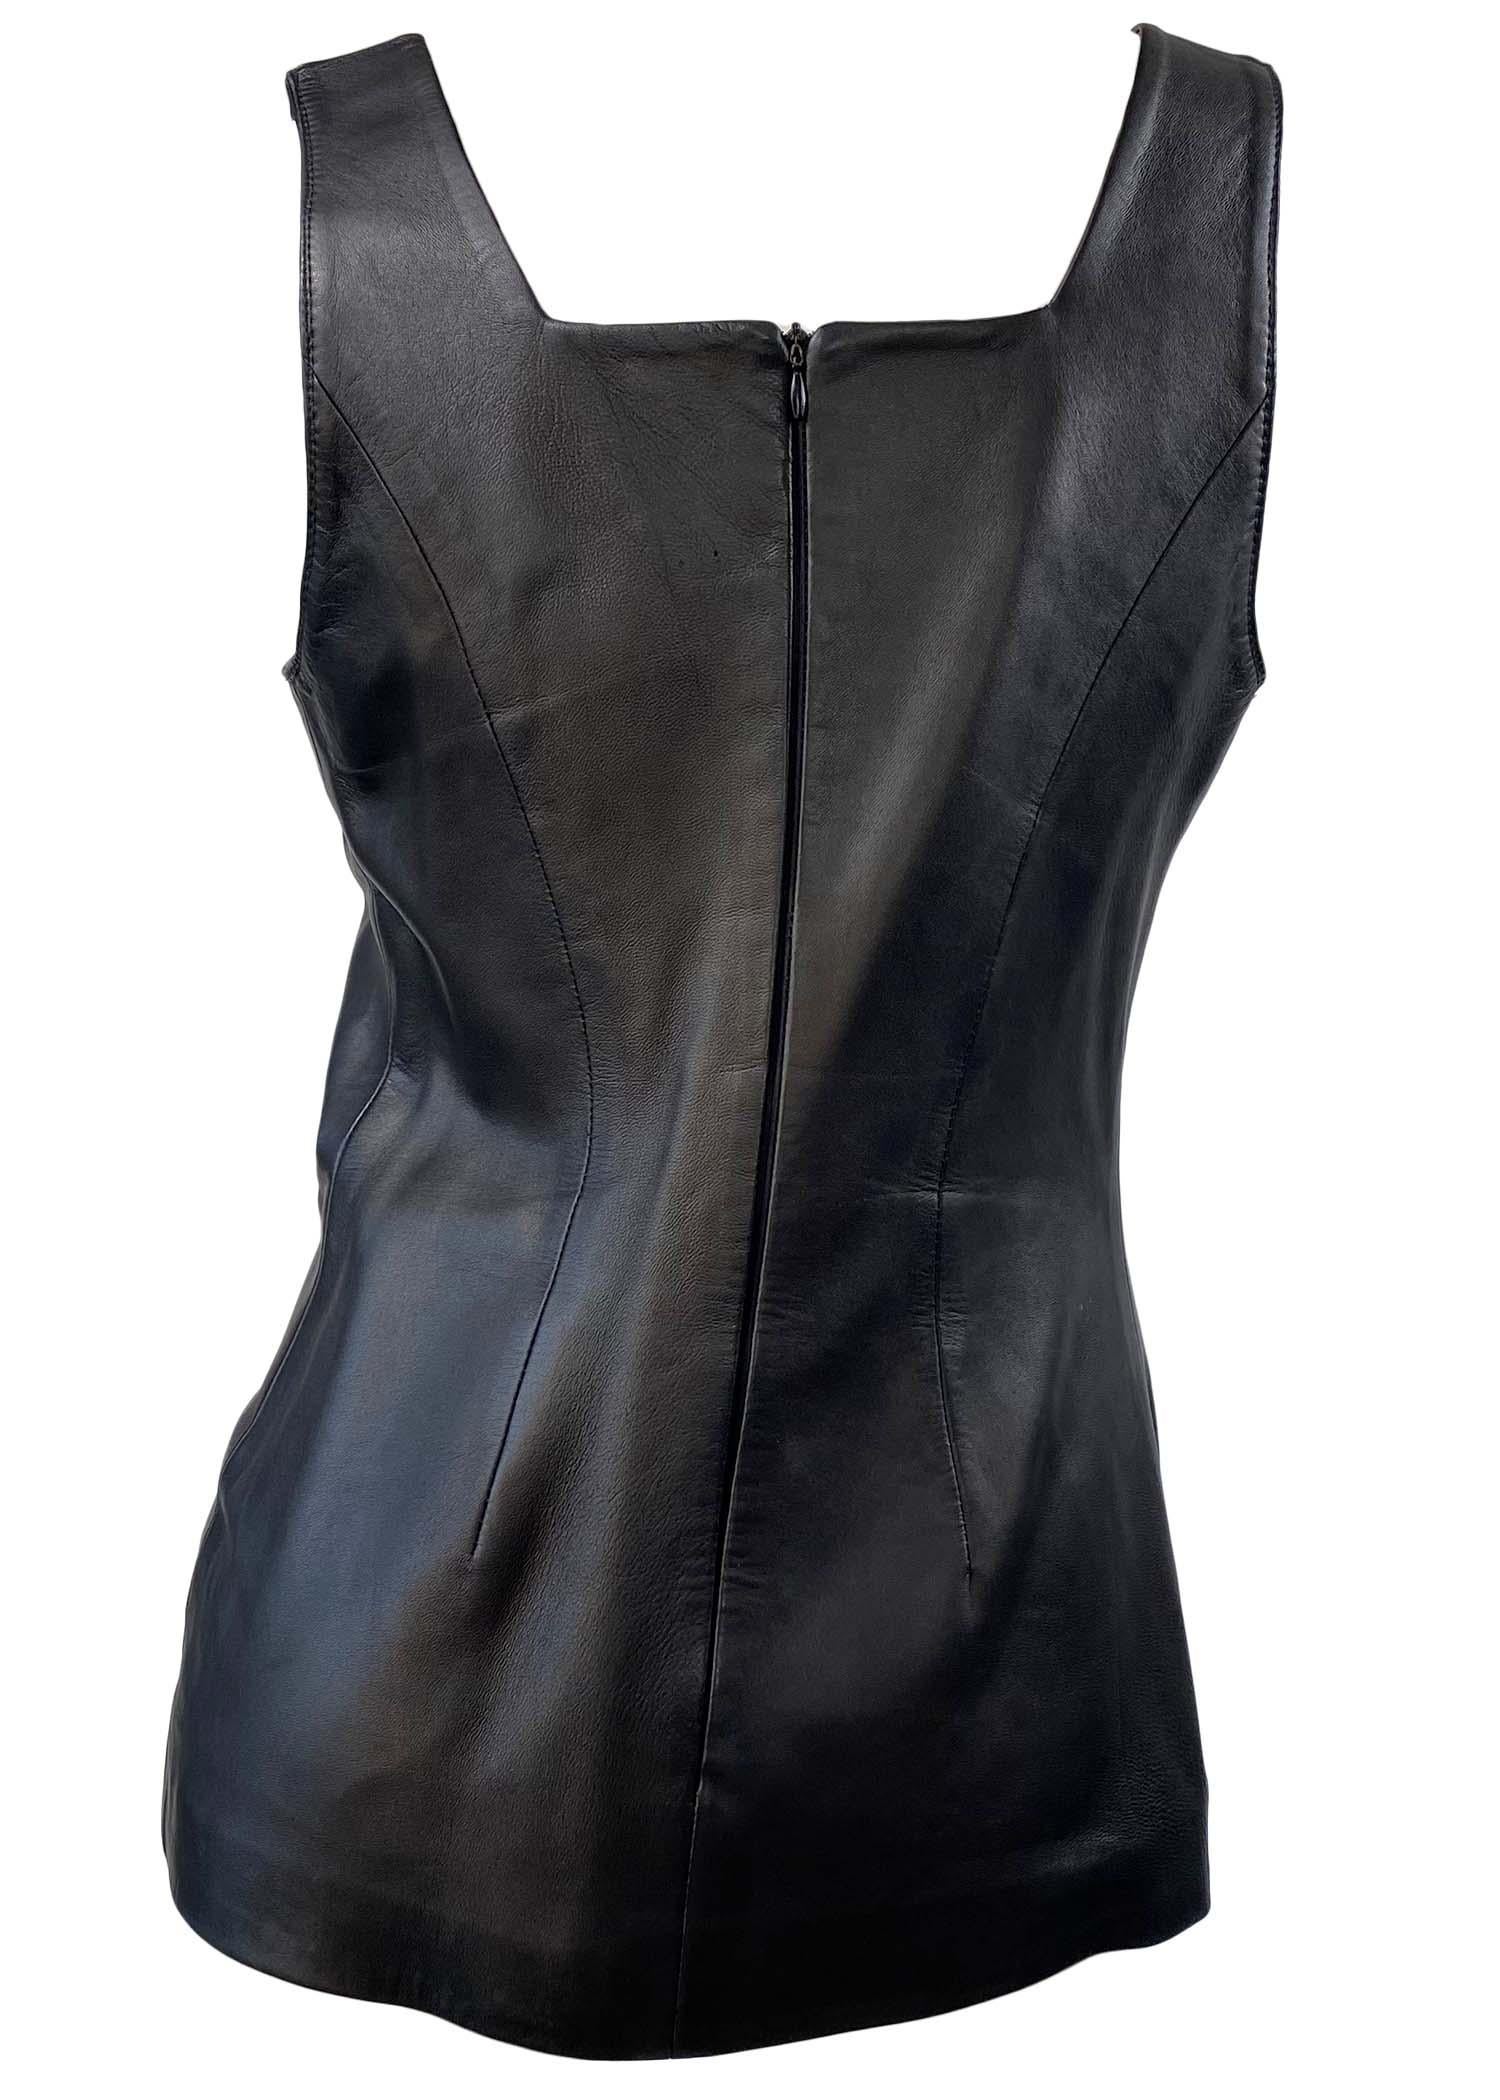 Black S/S 1997 Gucci by Tom Ford Leather Sleeveless Top G Logo For Sale